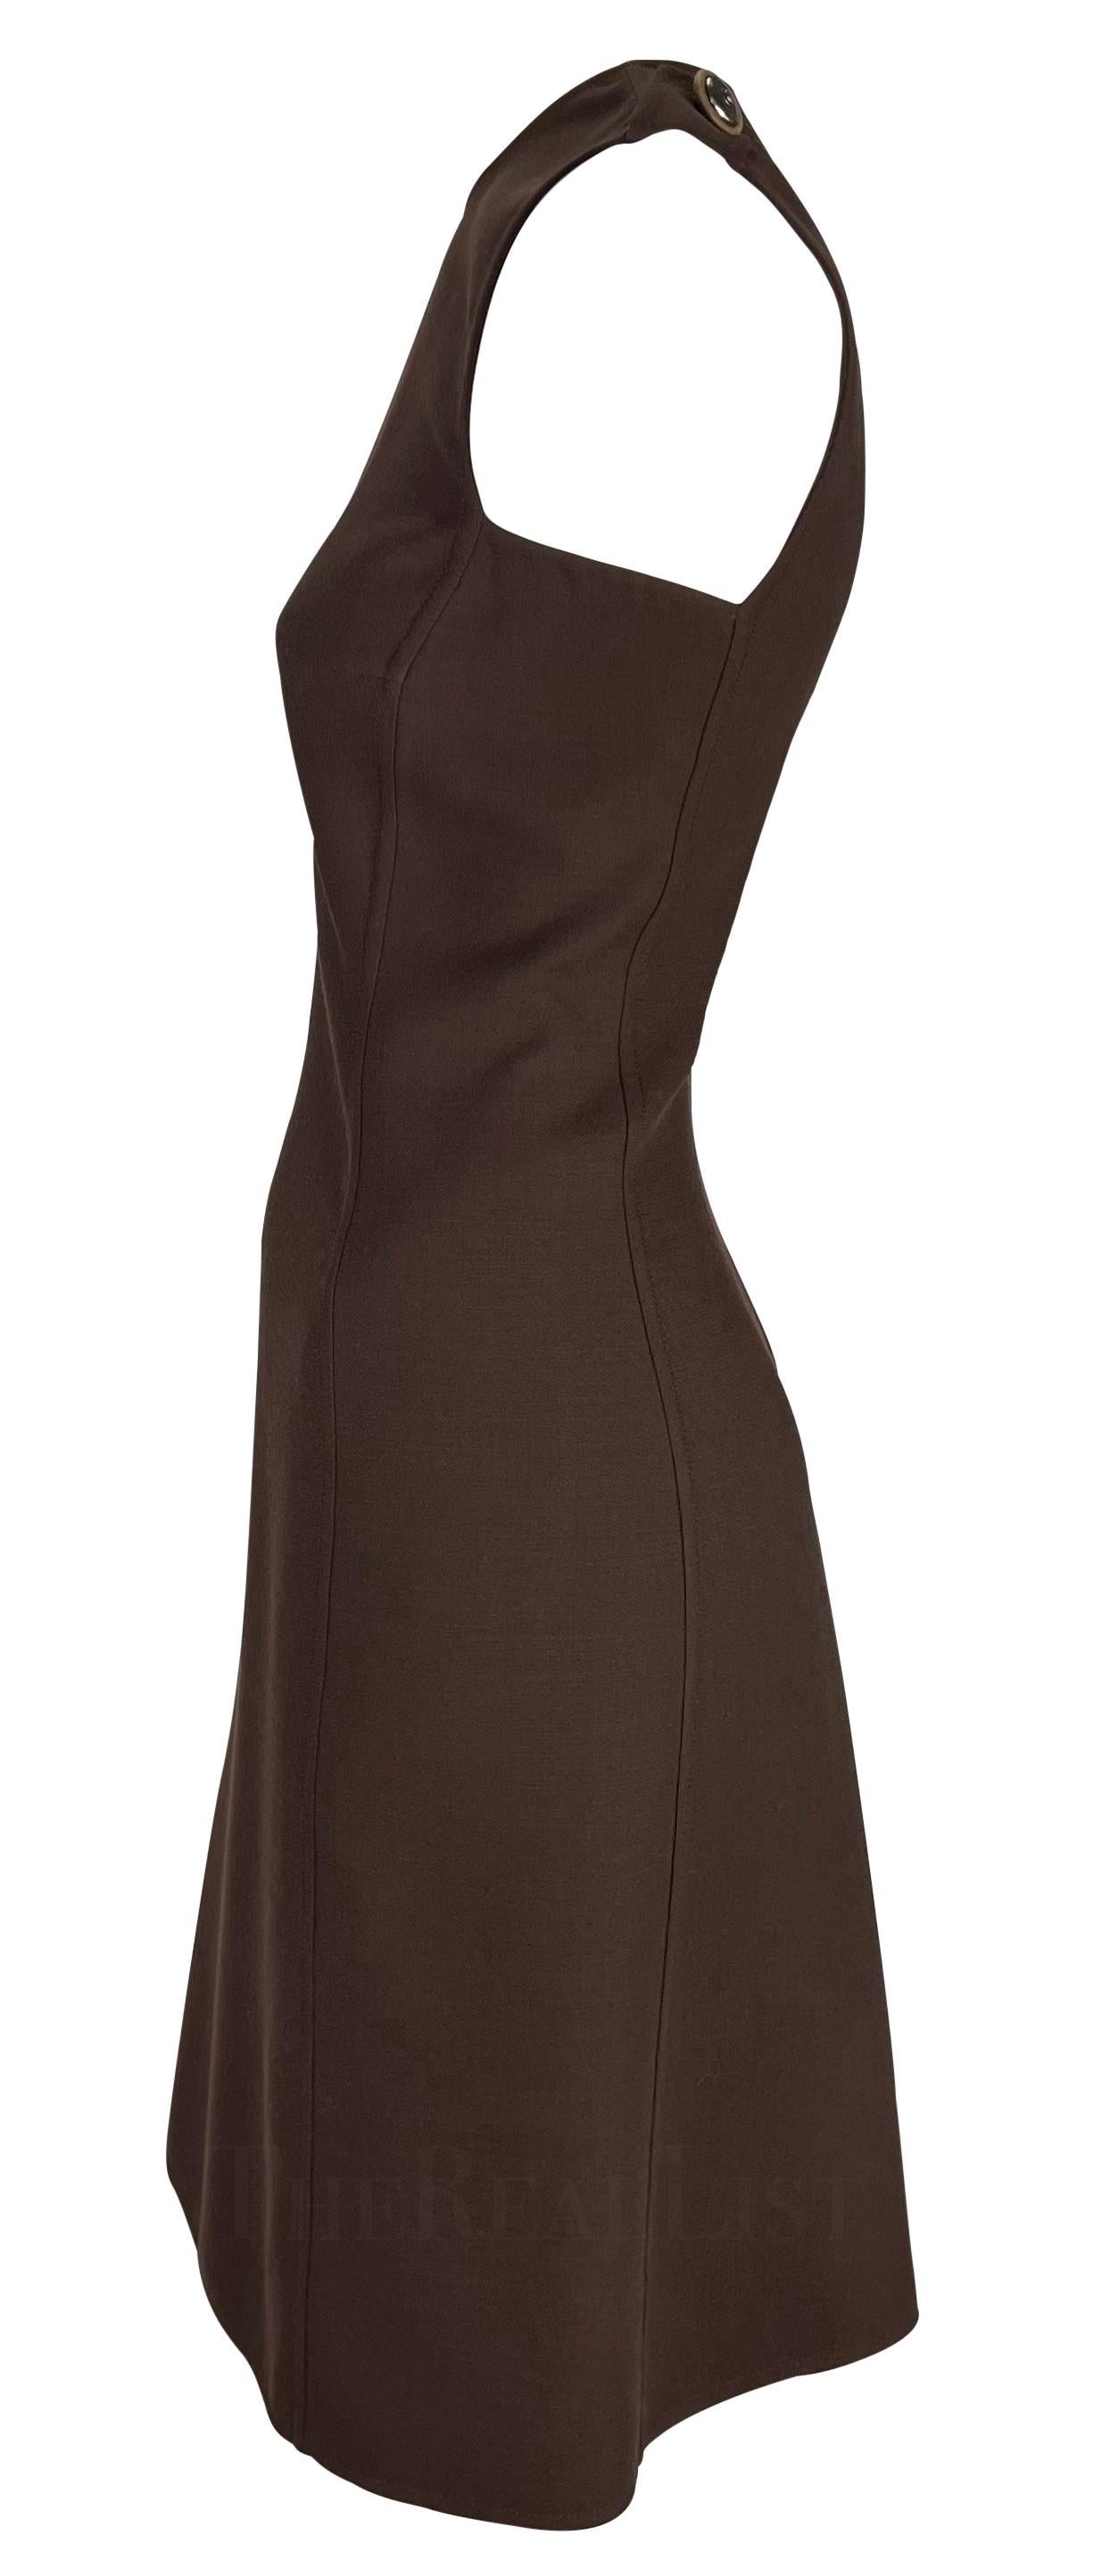 Presenting a fabulous brown Gianni Versace shift dress, designed by Gianni Versace. From the Fall/Winter 1996 collection, this dress features a high neckline and is made complete with epaulets at either shoulder with a silver-tone Versace Medusa